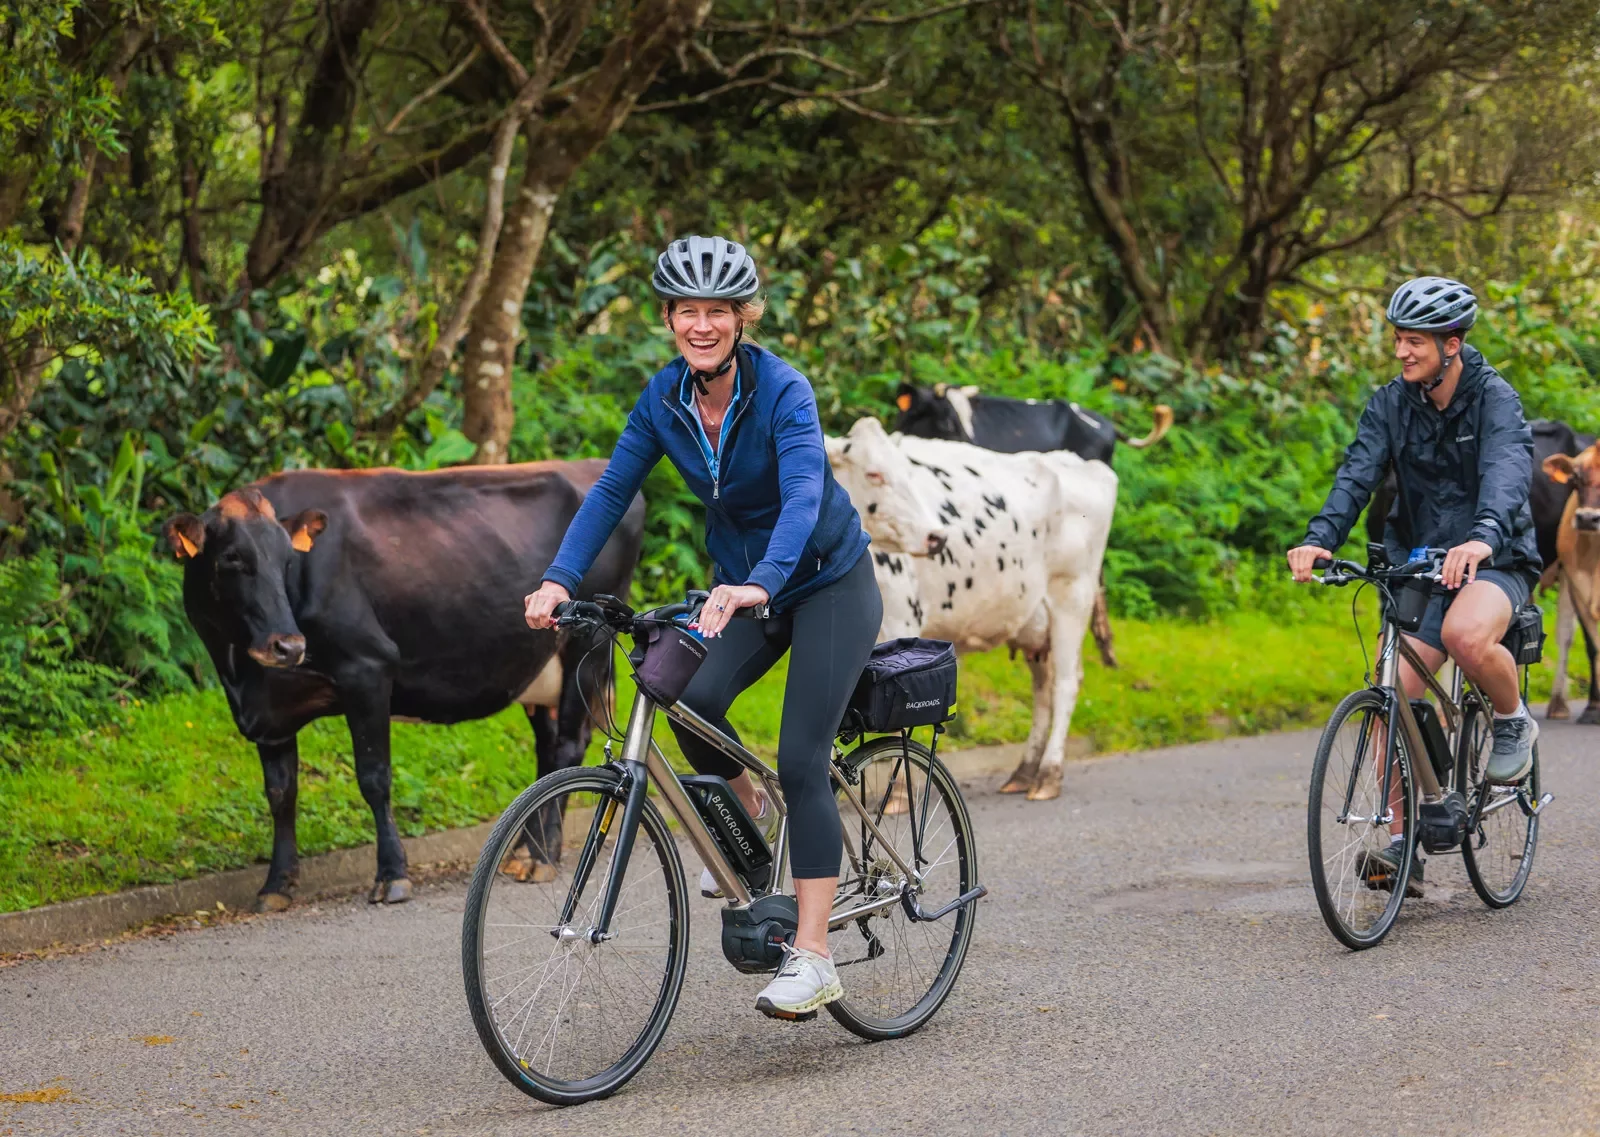 Man and woman riding bikes in front of a group of cows on the road